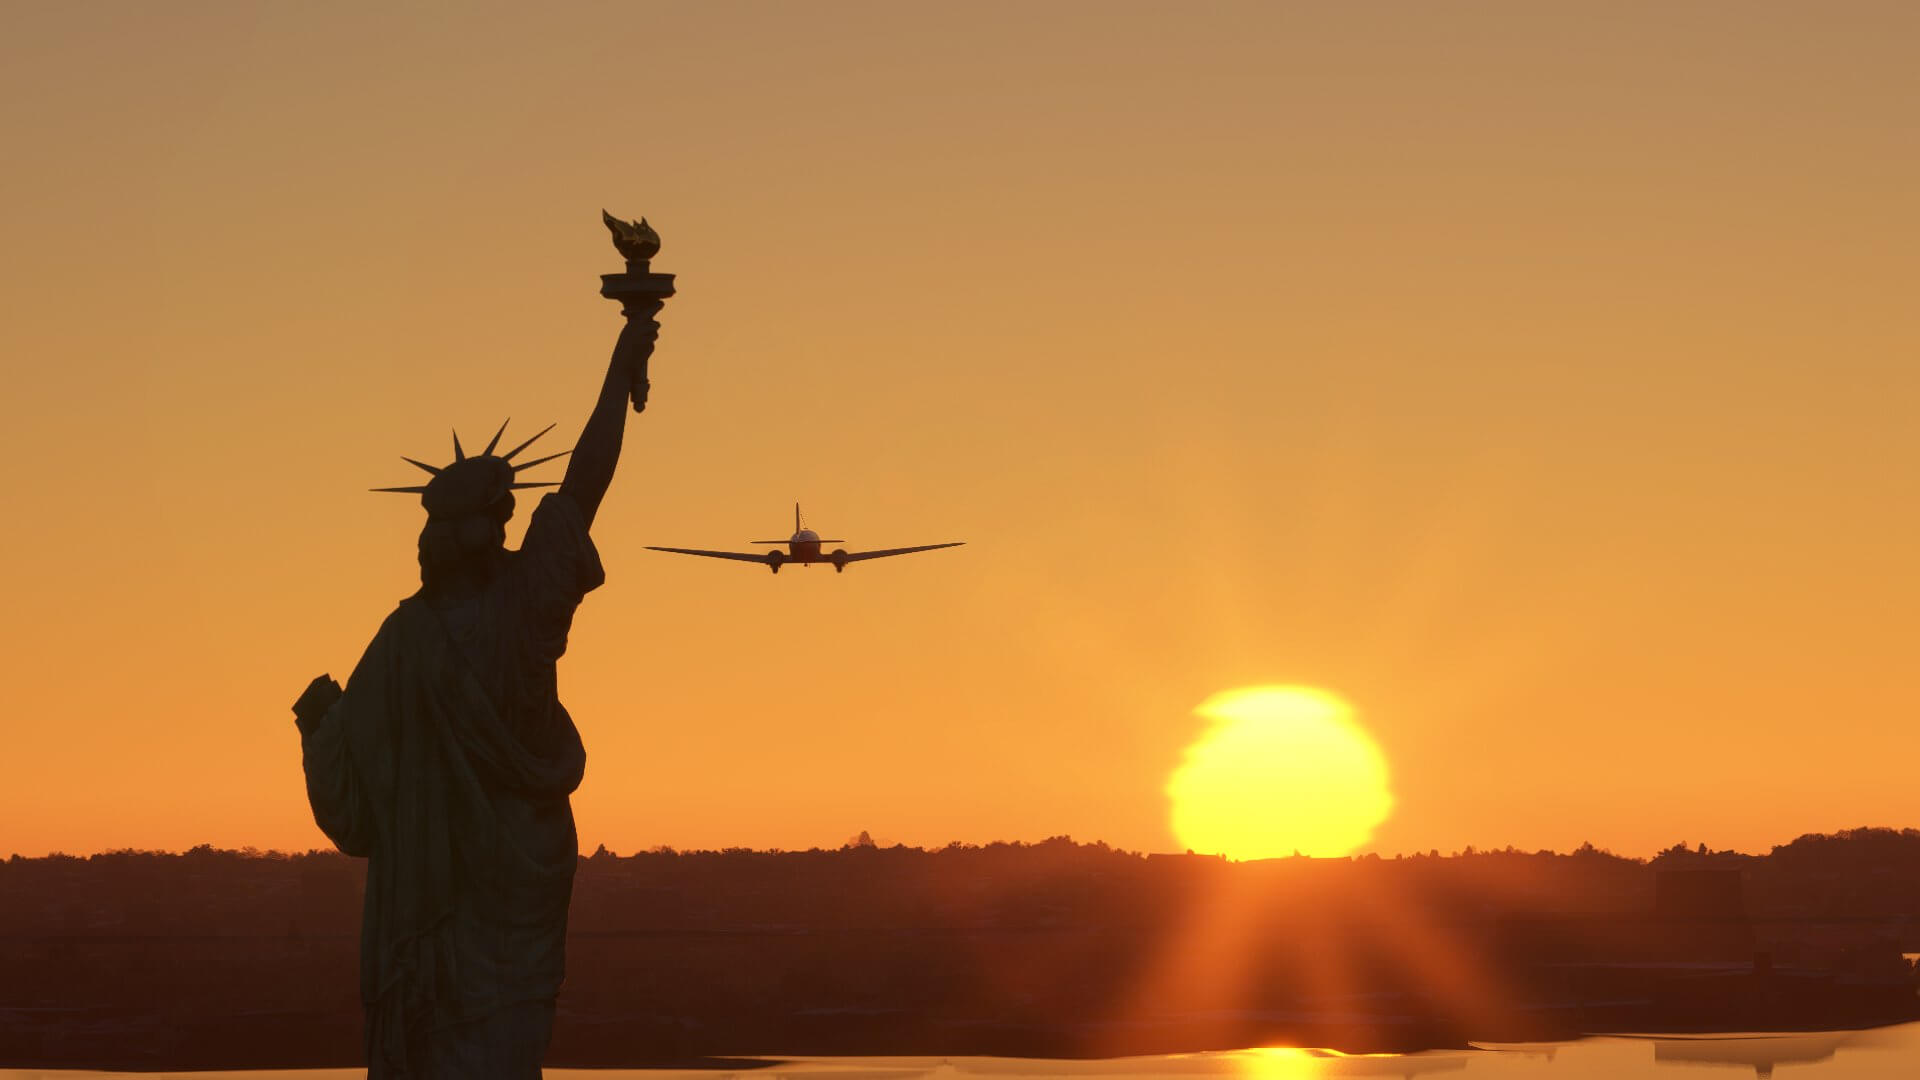 The sky is orange and a silhouette of a plane is visible beside the silhouette of the statue of Liberty.